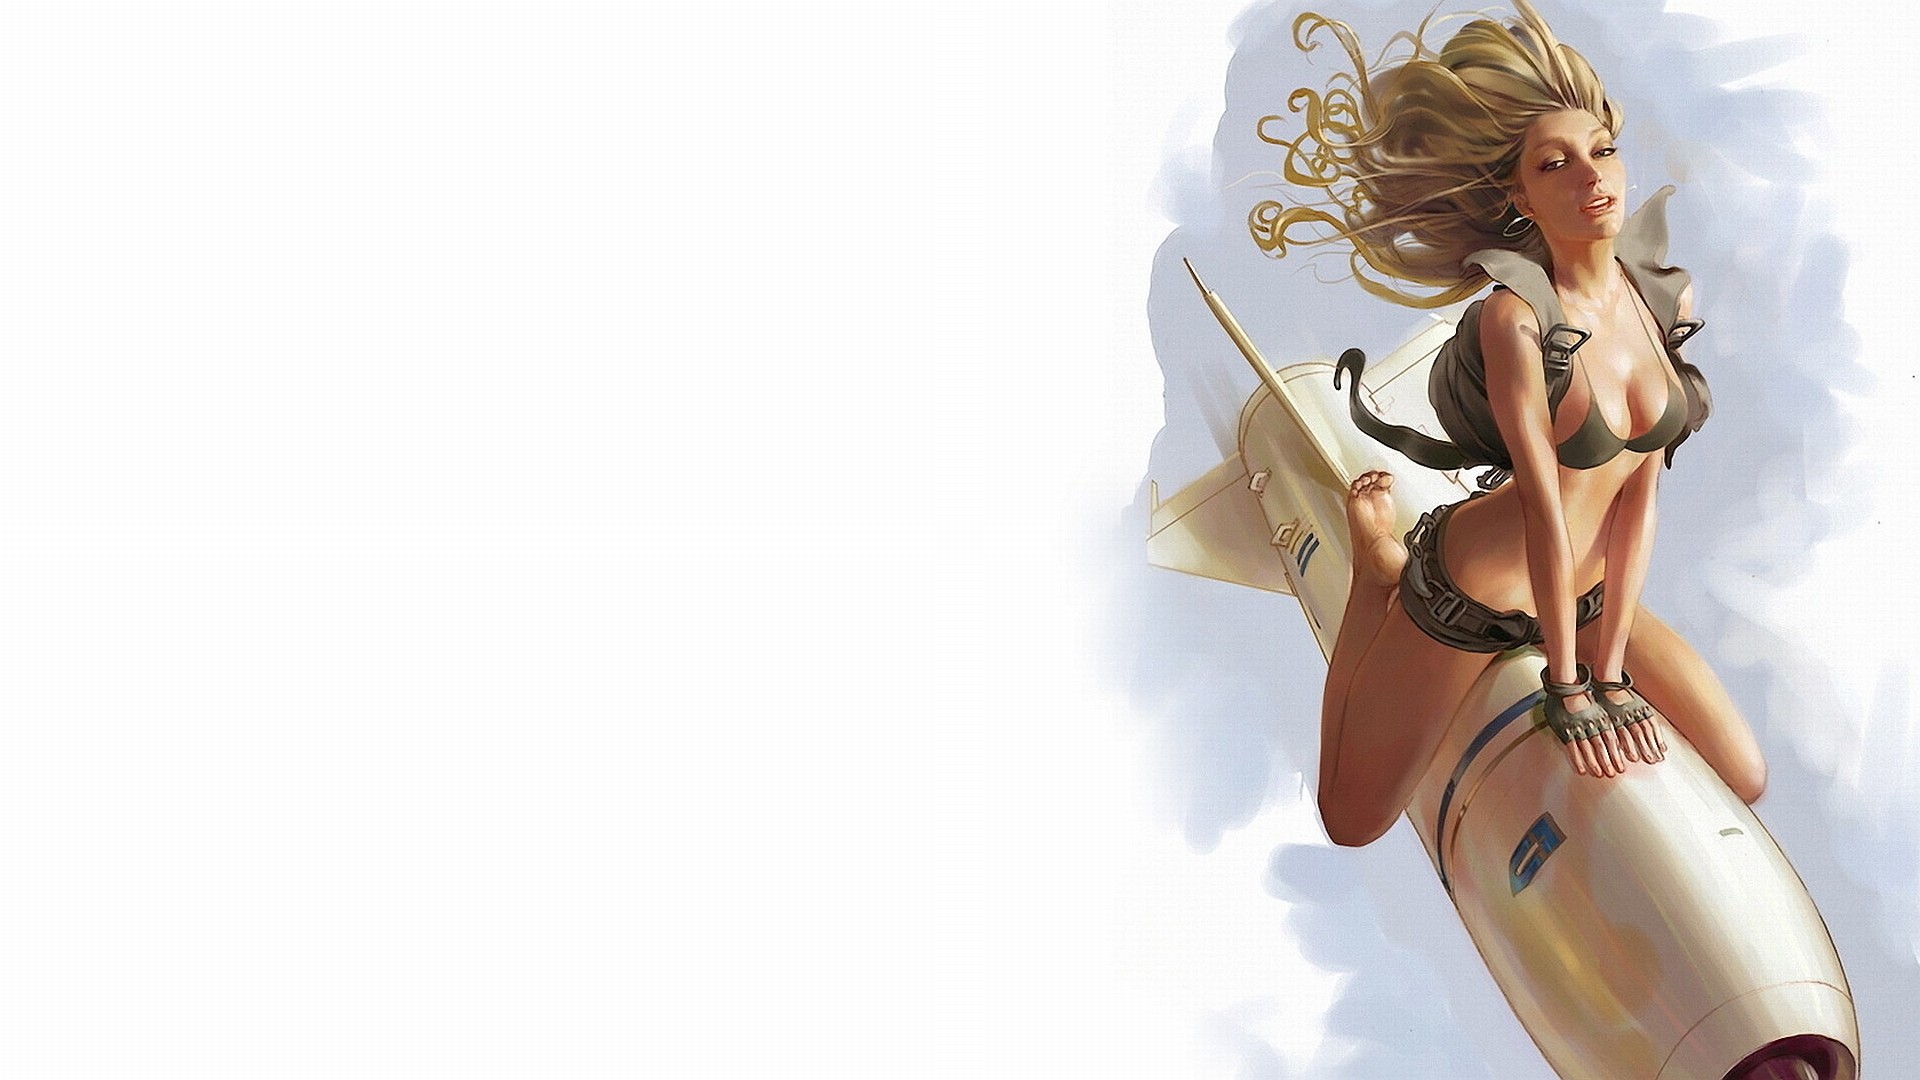 1920x1080 Downloading "pinup girl riding a rocket" Wallpaper Background